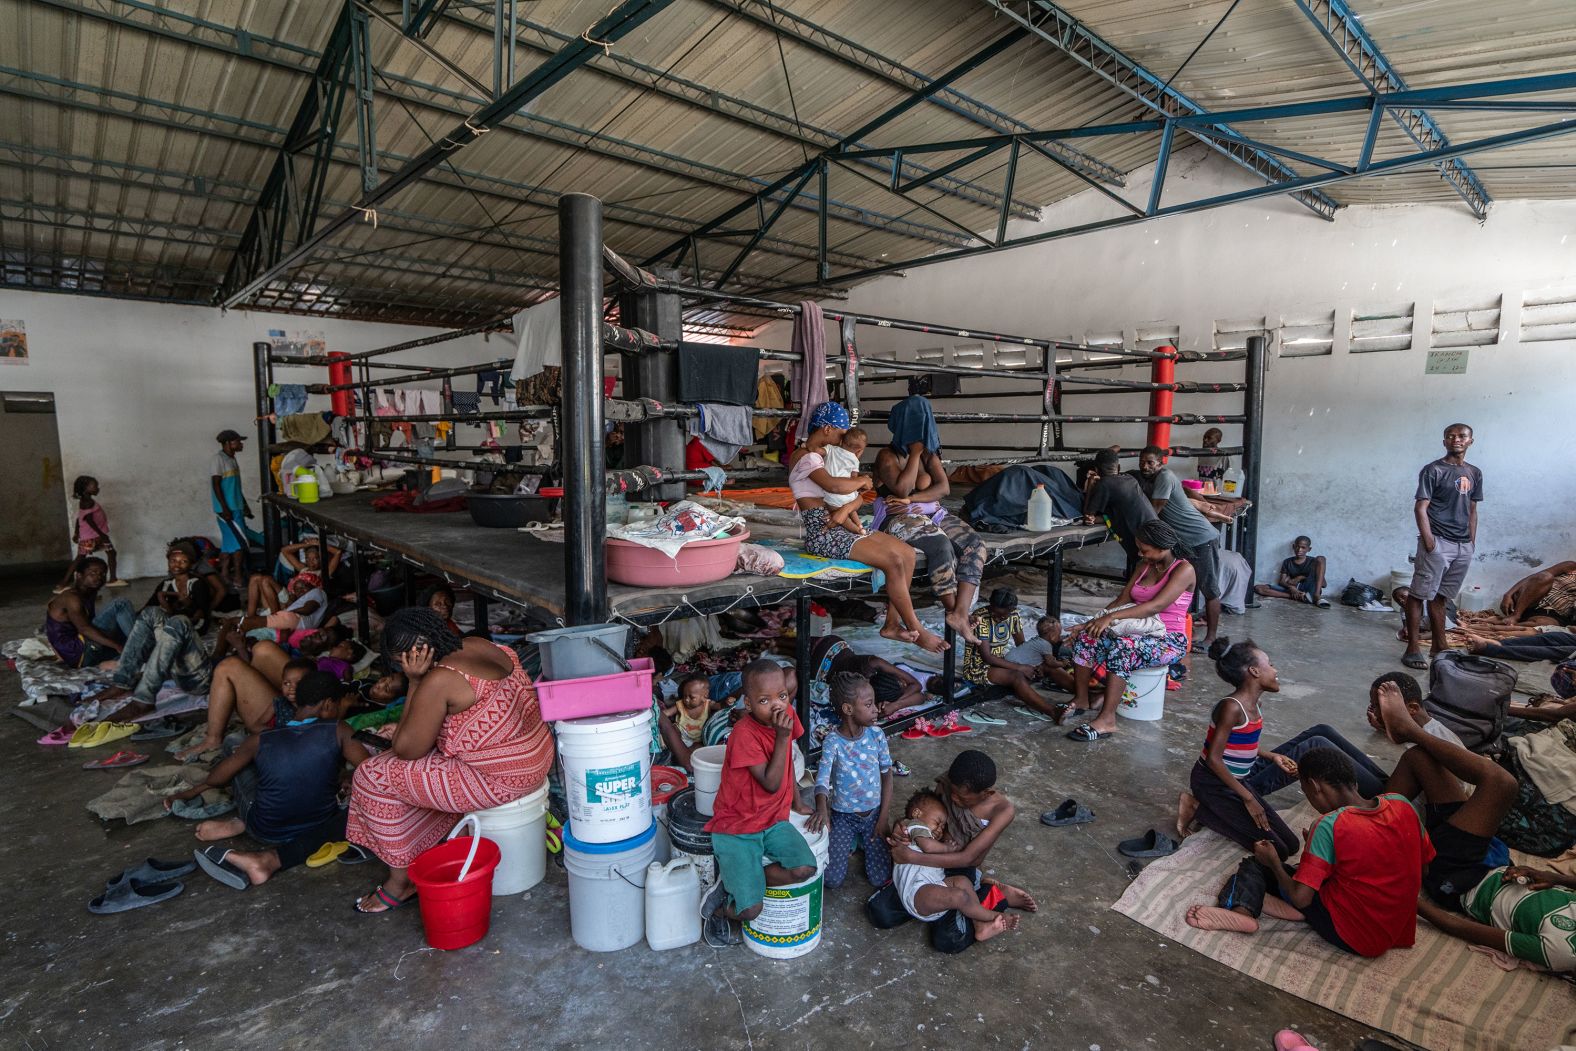 People take shelter at a boxing arena in downtown Port-au-Prince.